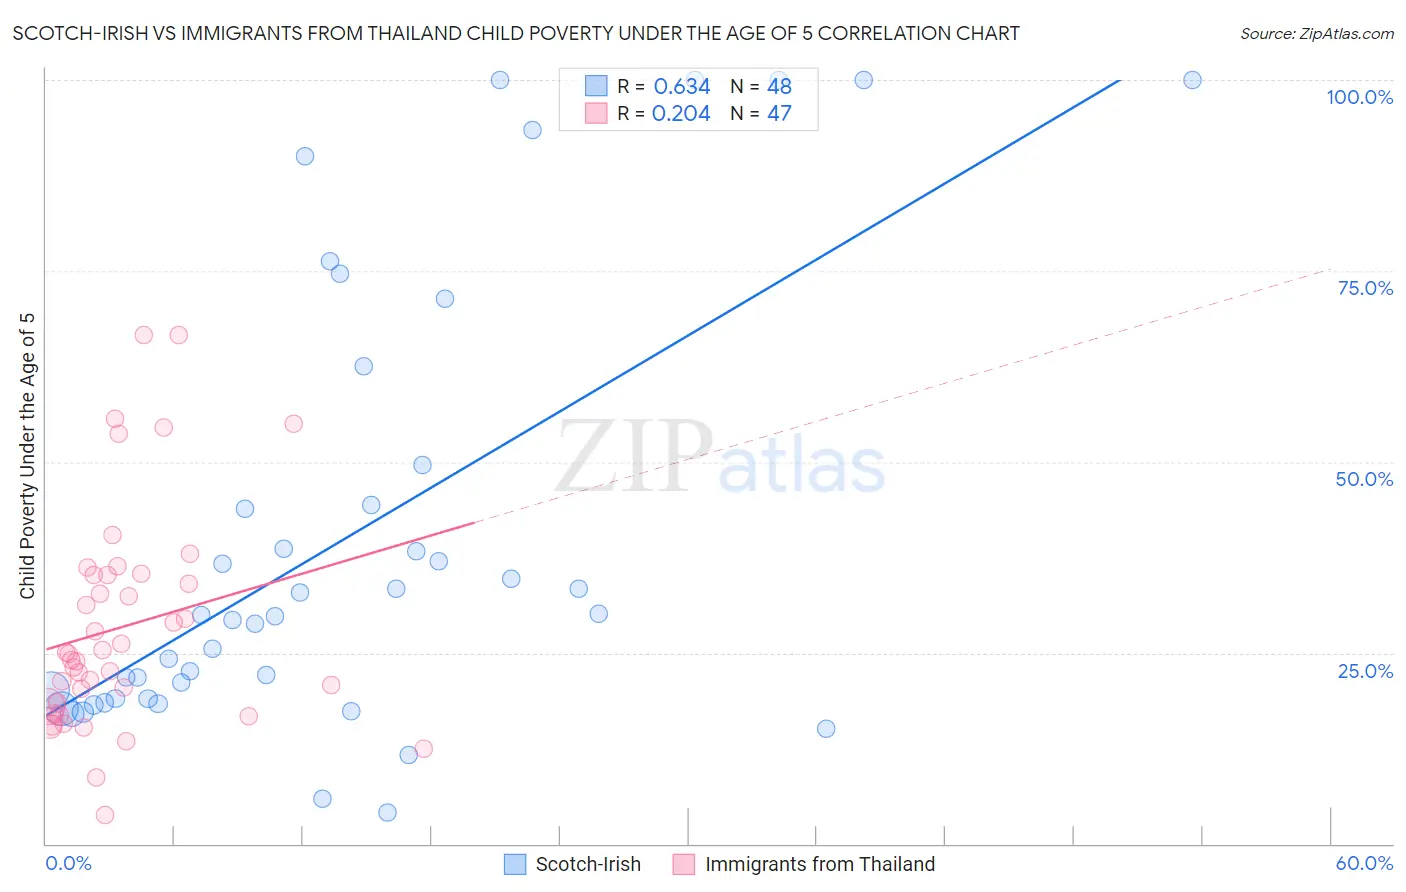 Scotch-Irish vs Immigrants from Thailand Child Poverty Under the Age of 5